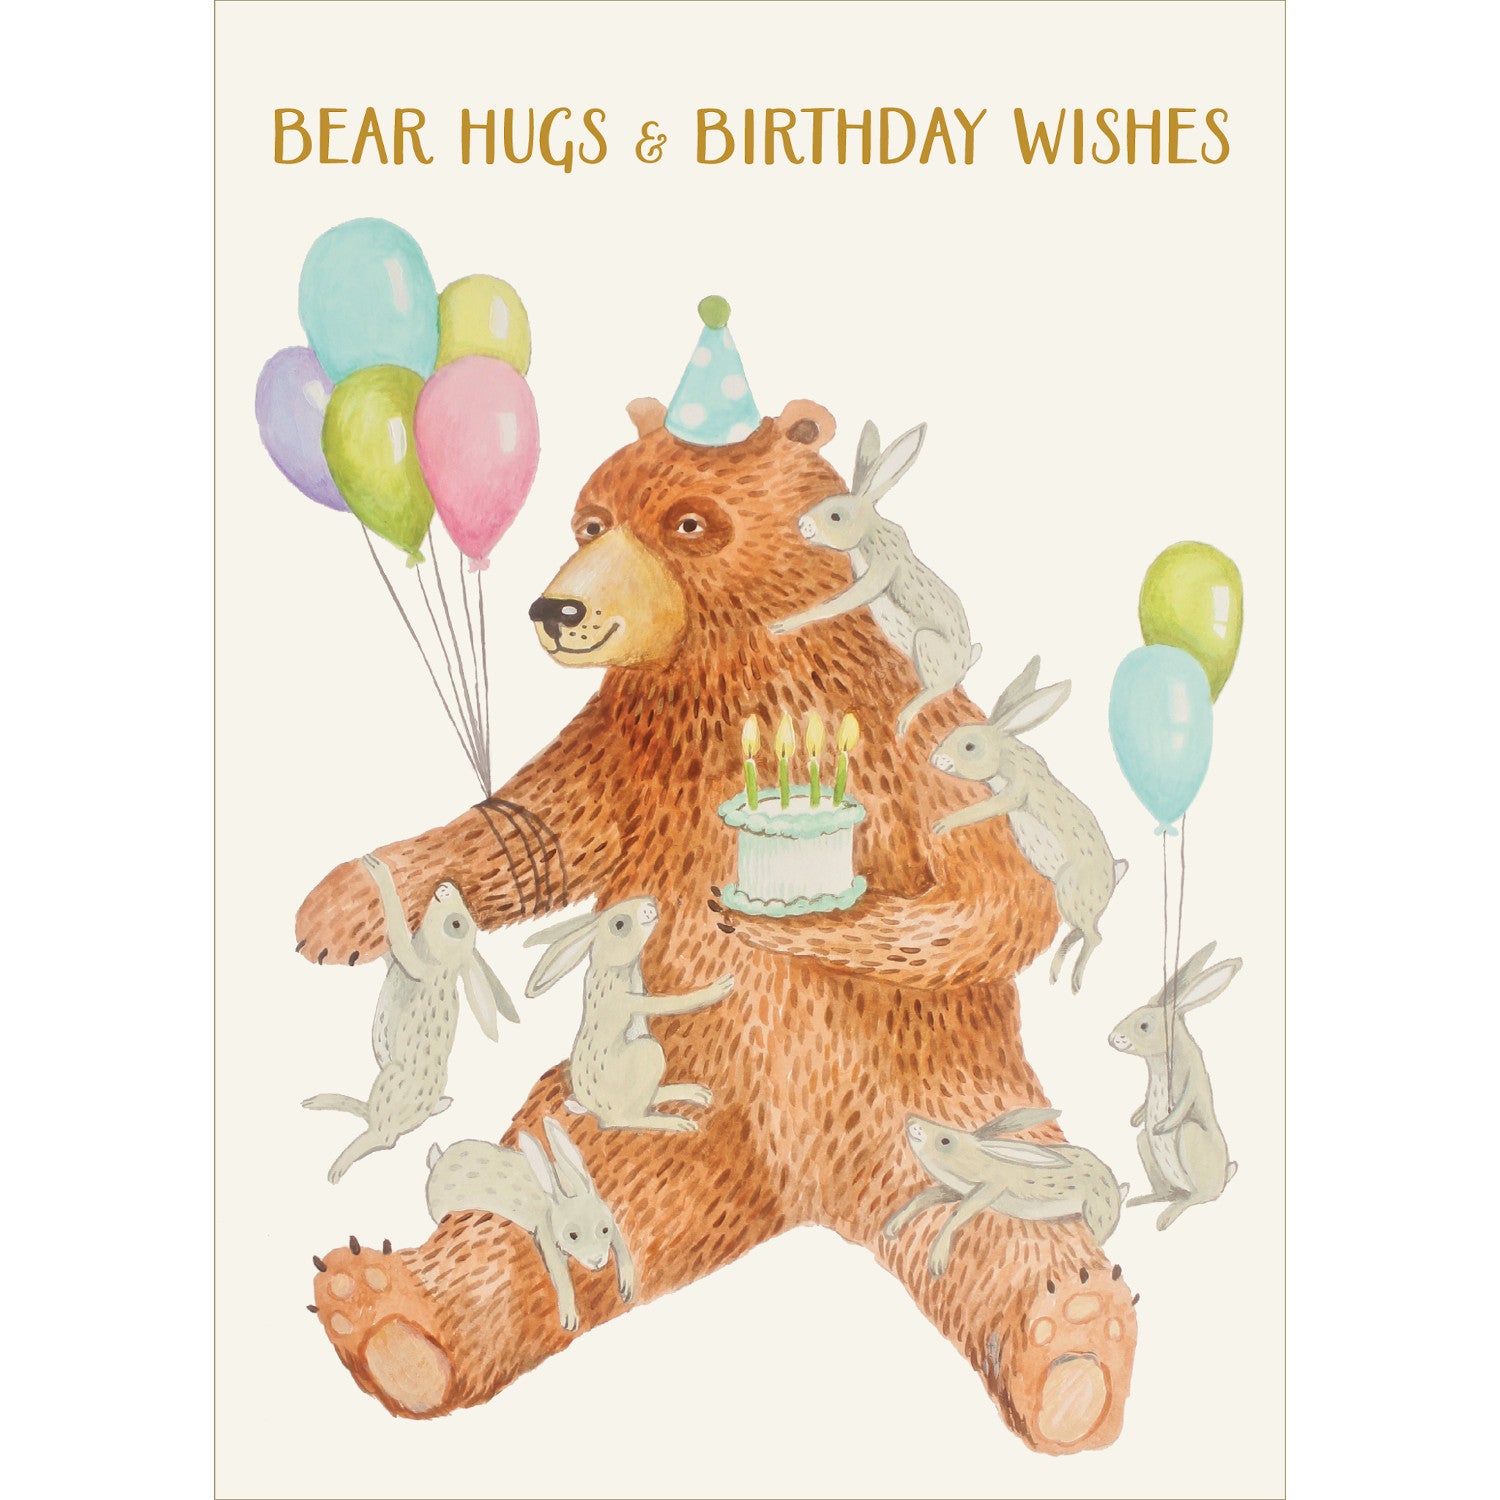 A whimsical illustration of a large brown bear in a party hat, holding balloons and a birthday cake, with sever gray rabbits hugging their large friend on a cream background, with &quot;Bear Hugs &amp; Birthday Wishes&quot; printed in gold across the top.